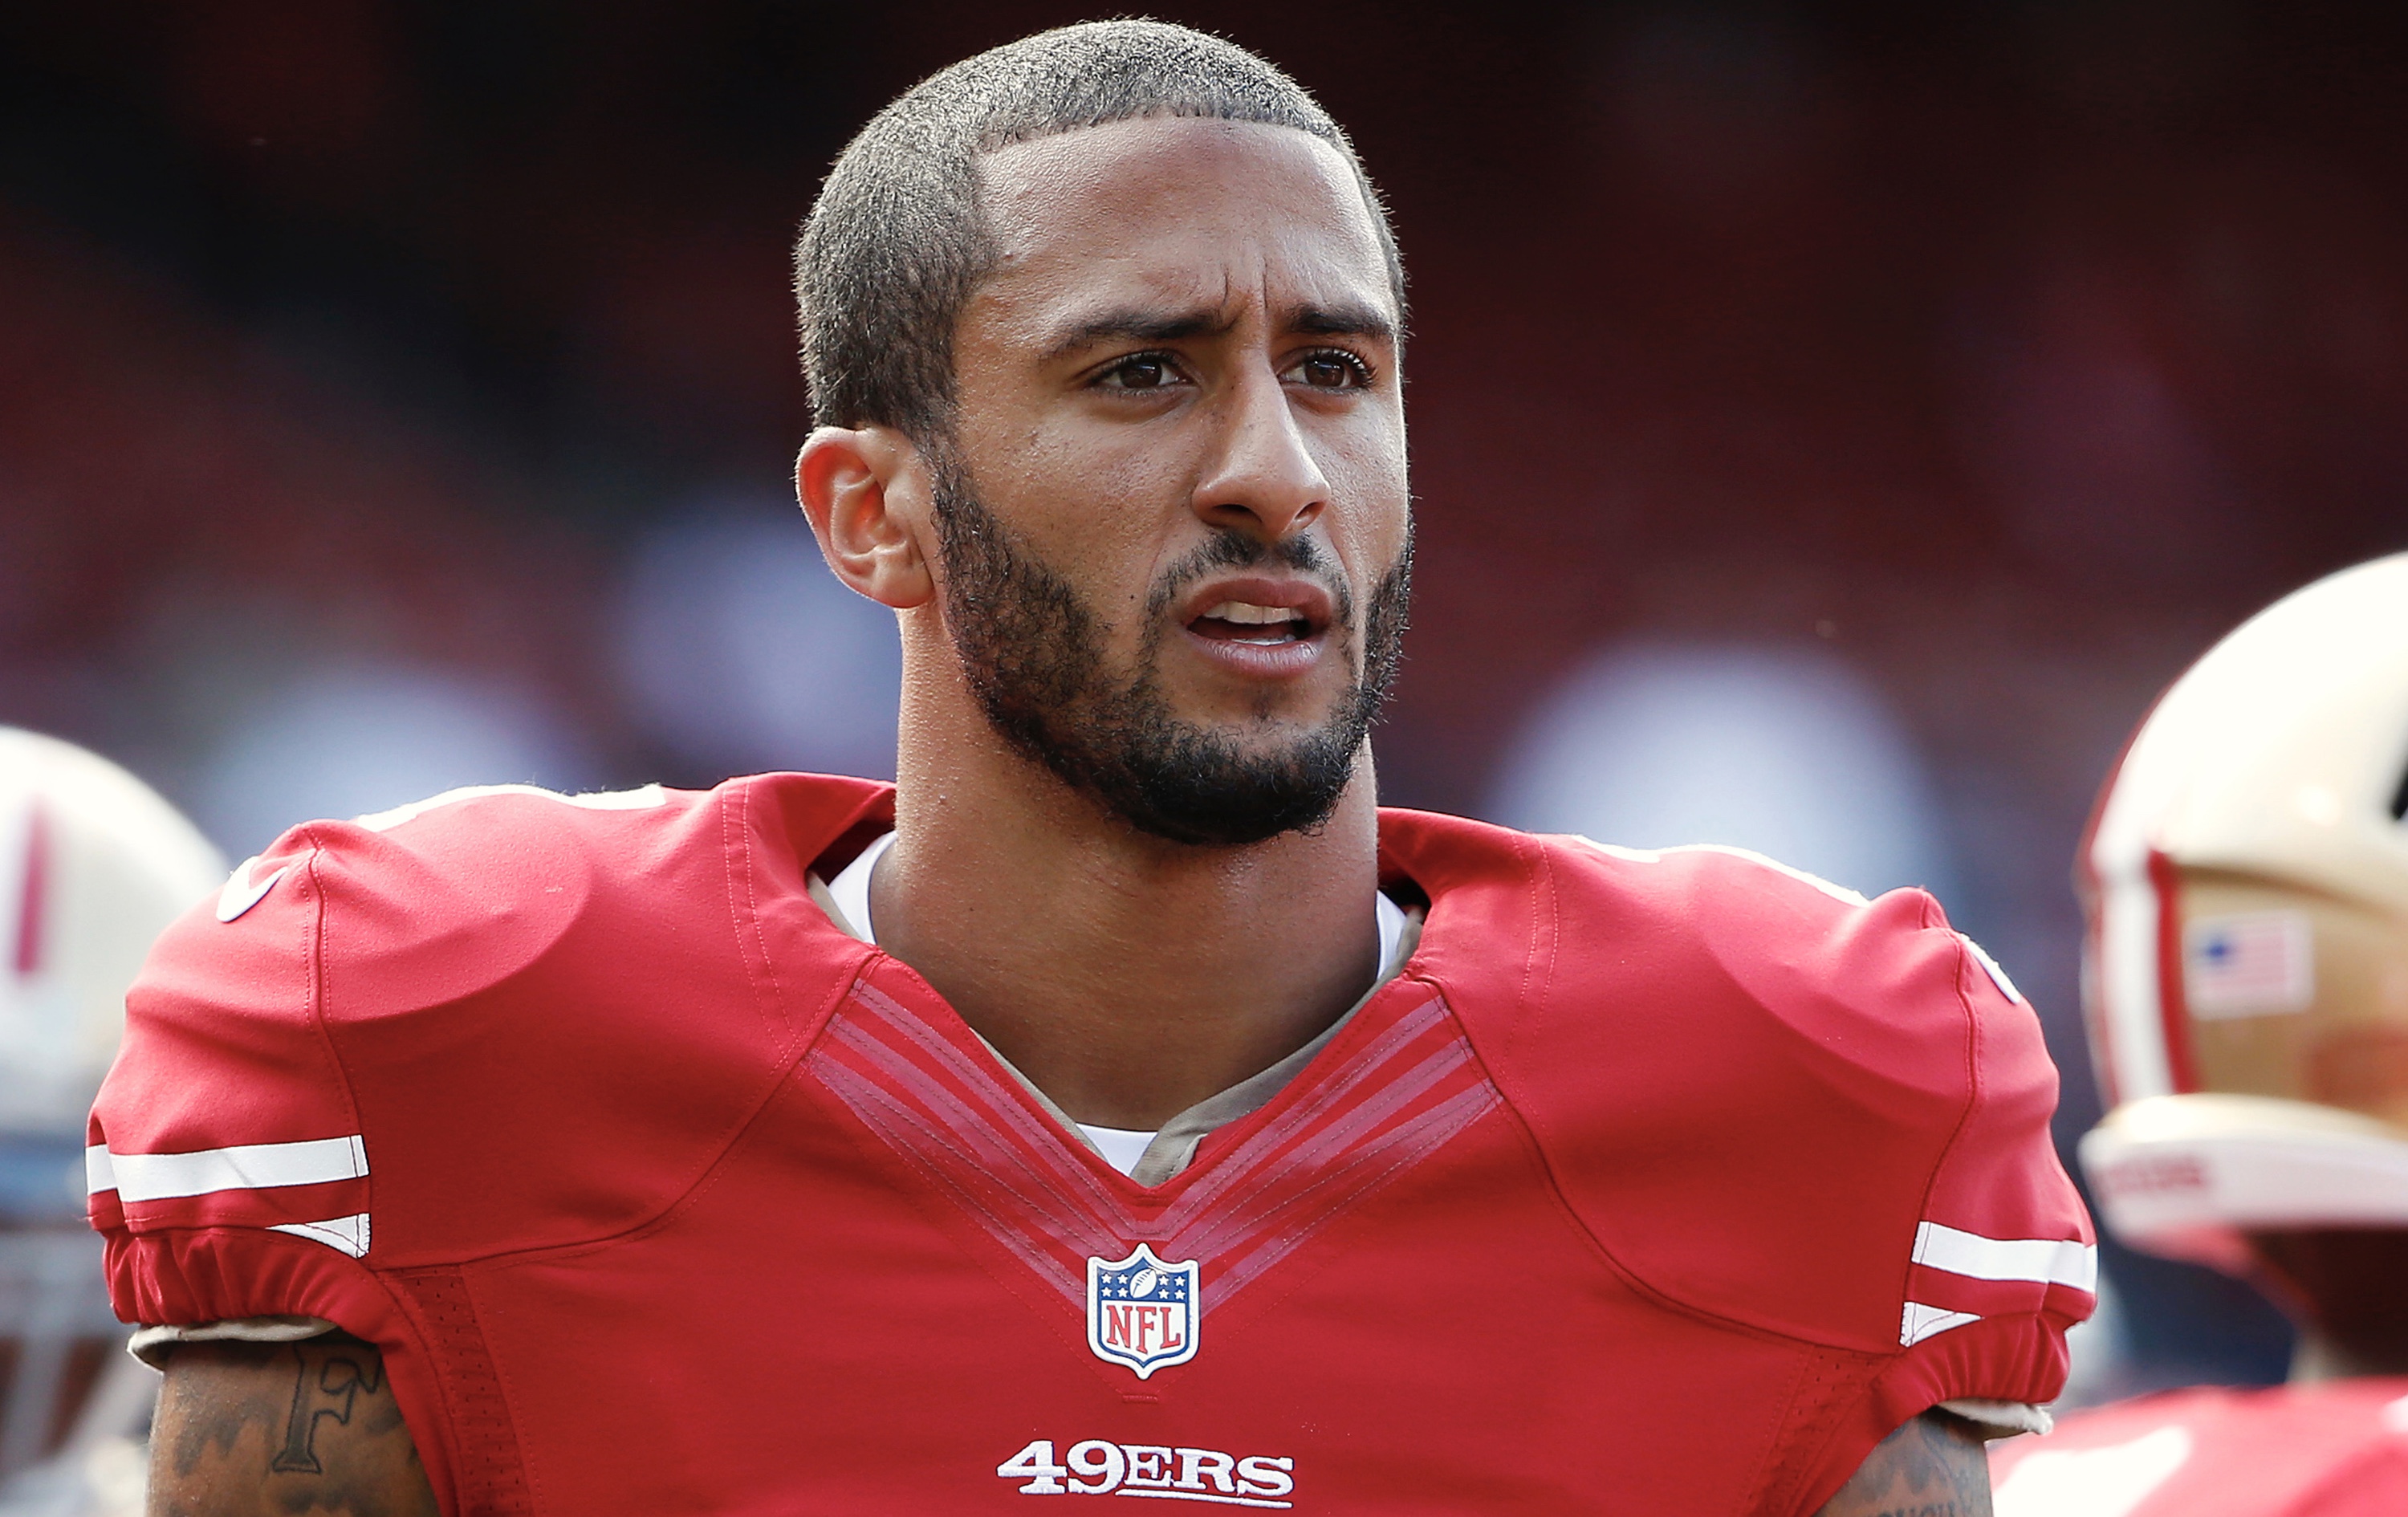 What the NFL Players’ Union Chief Has to Say About Colin Kaepernick’s Protest